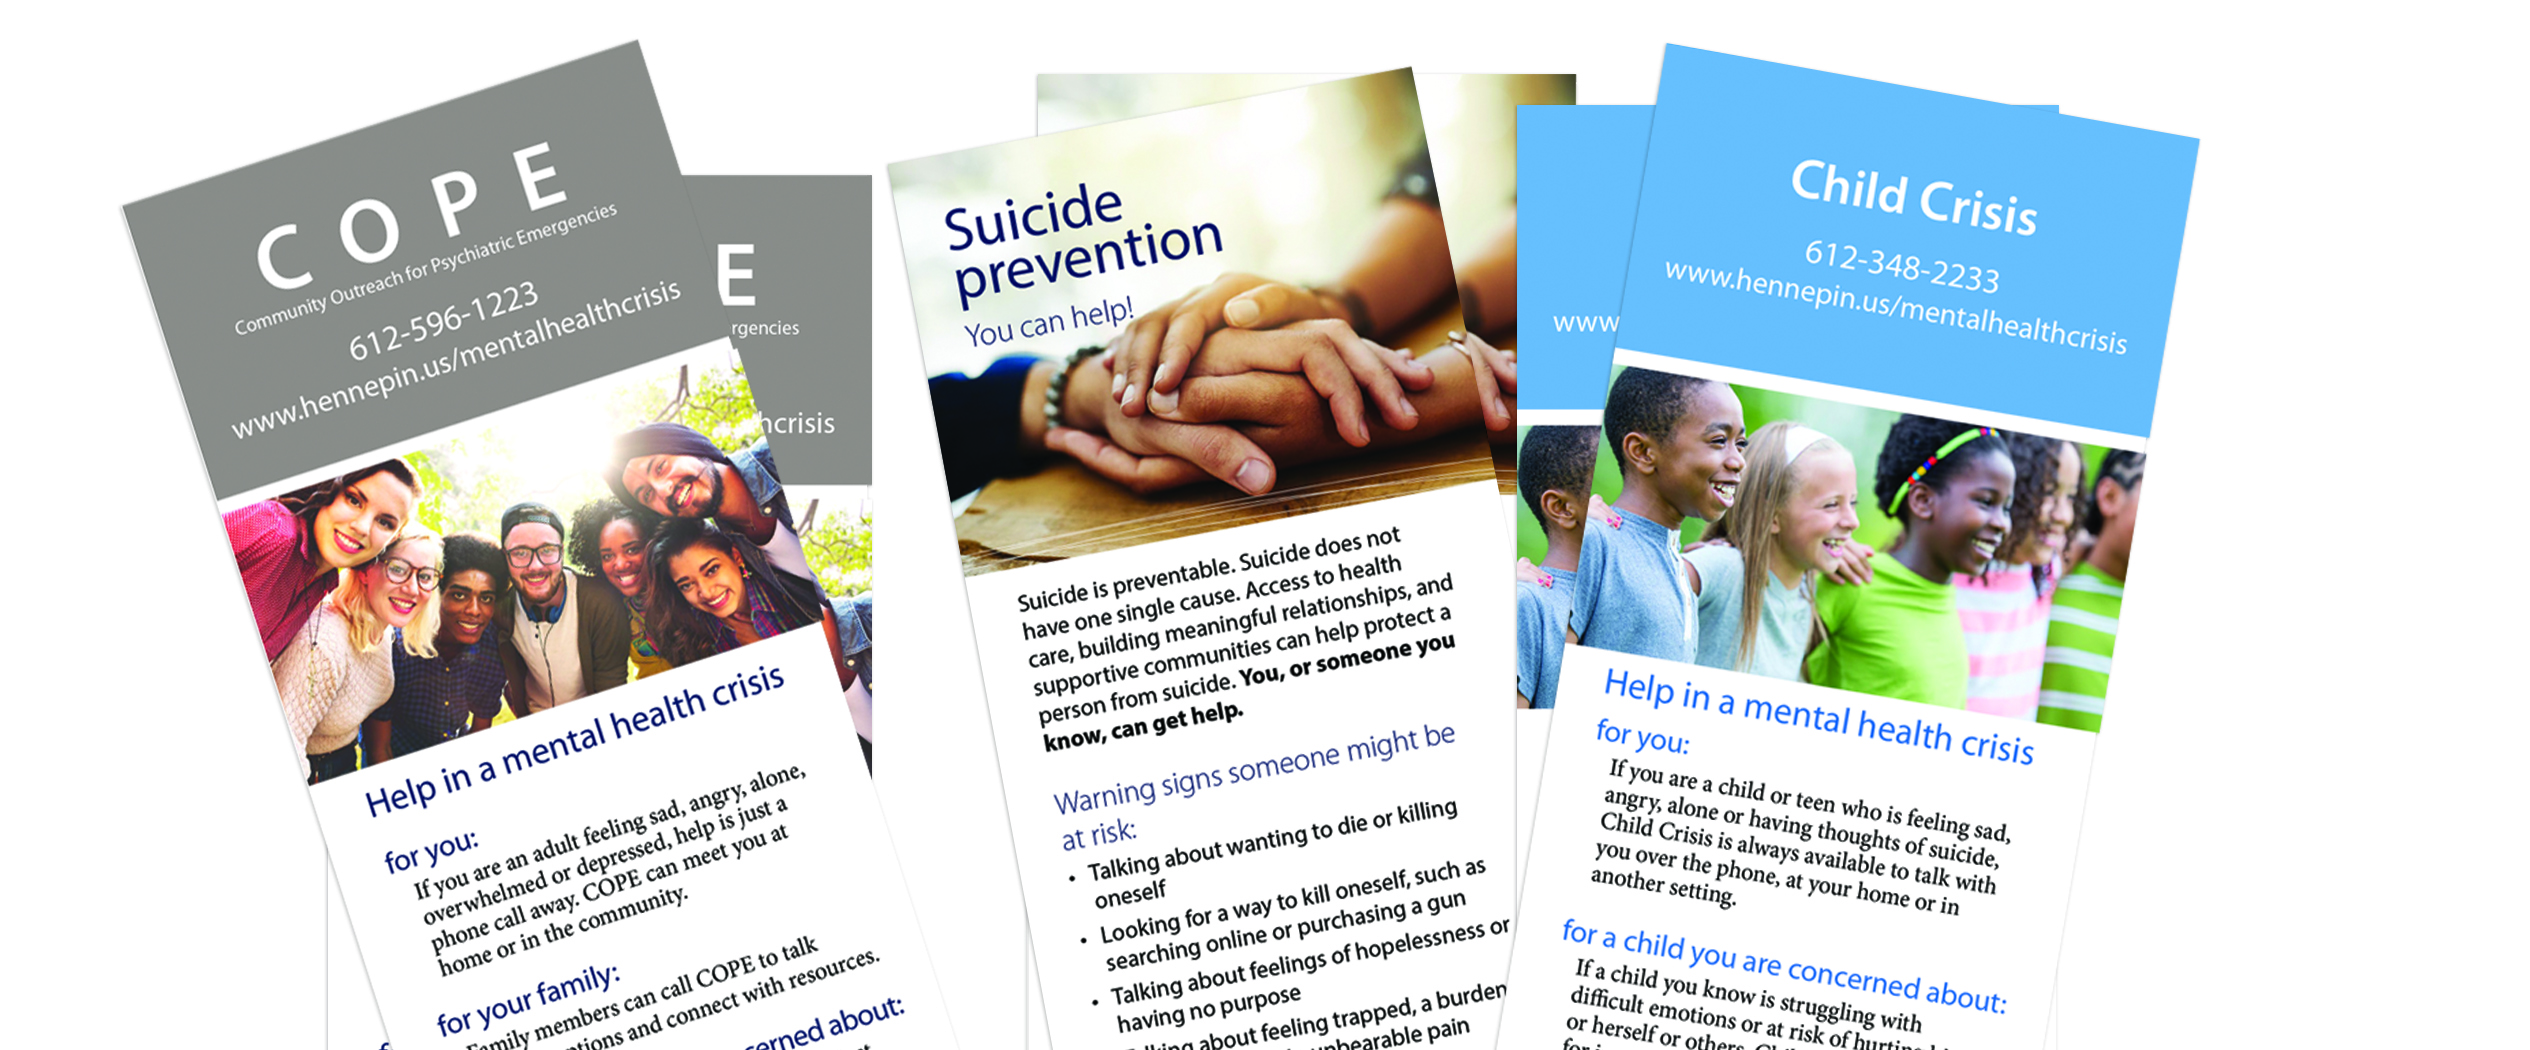 COPE, Child Crisis, and suicide prevention brochures sitting on a table